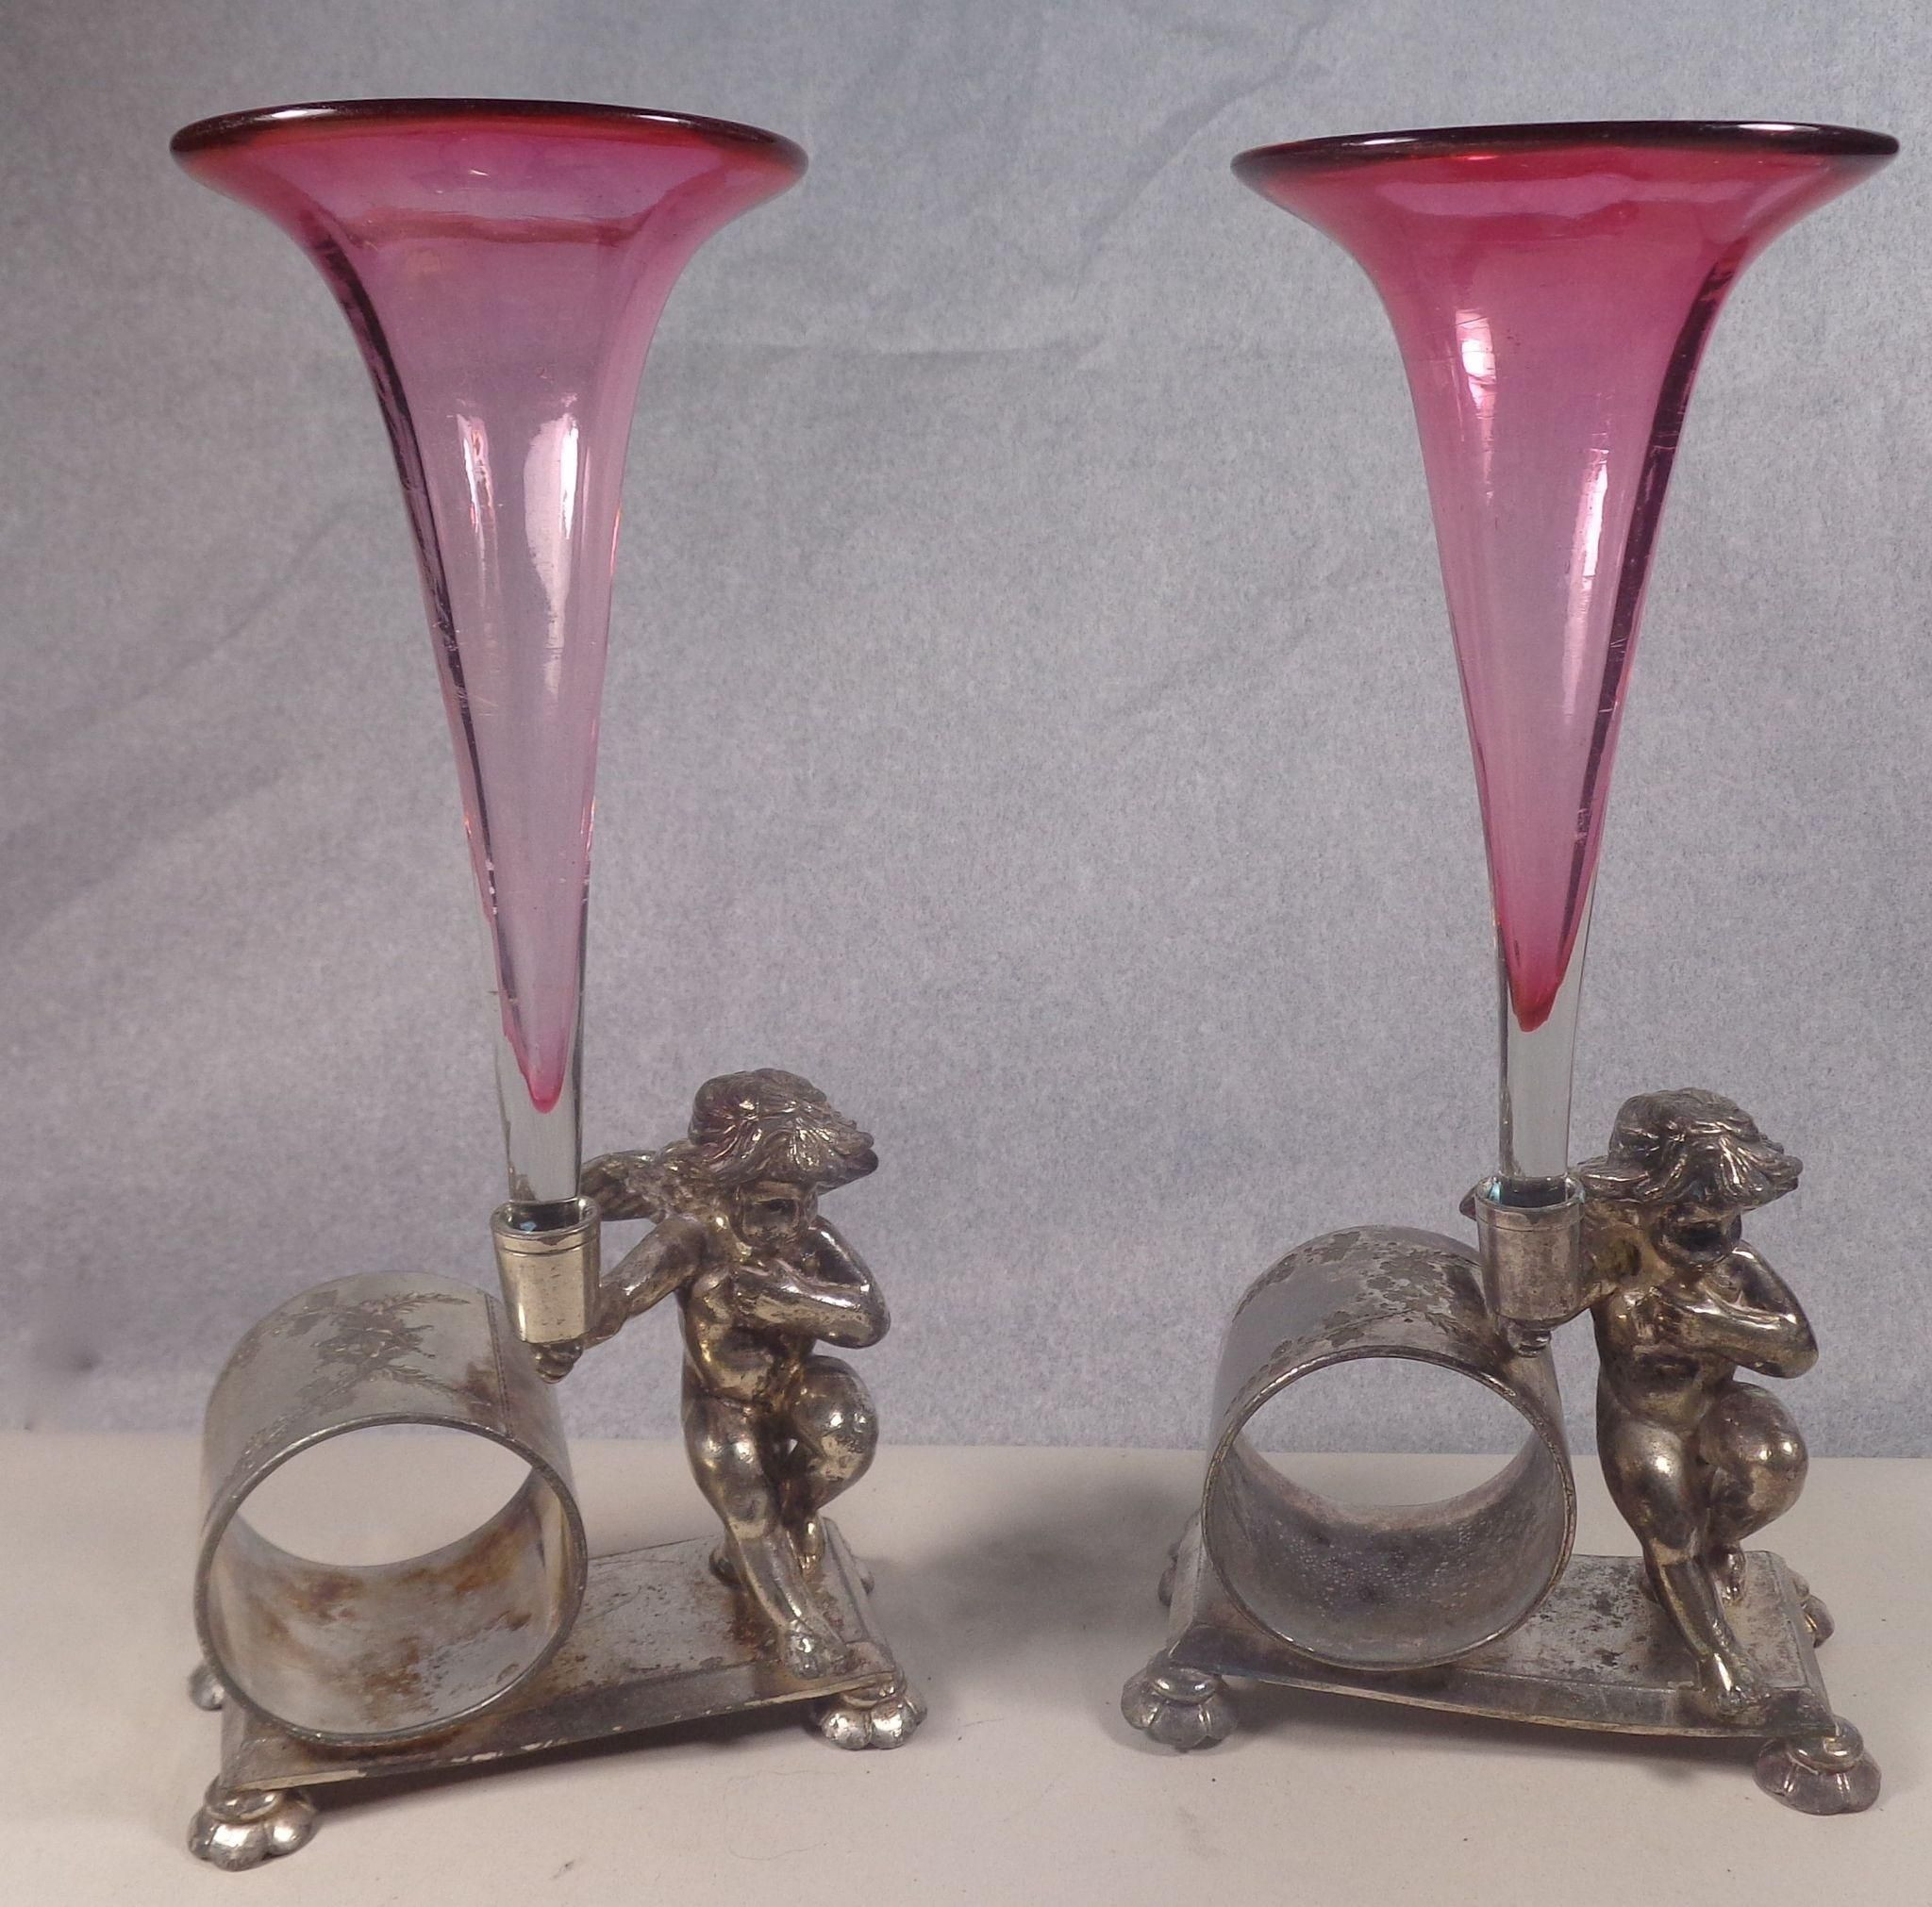 glass bud vase inserts of cranberry glass vases with meriden napkin holder beautiful art with regard to i am pleased to offer this pair of antique cherub figural napkin rings with cranberry glass bud vases by meriden b company usa